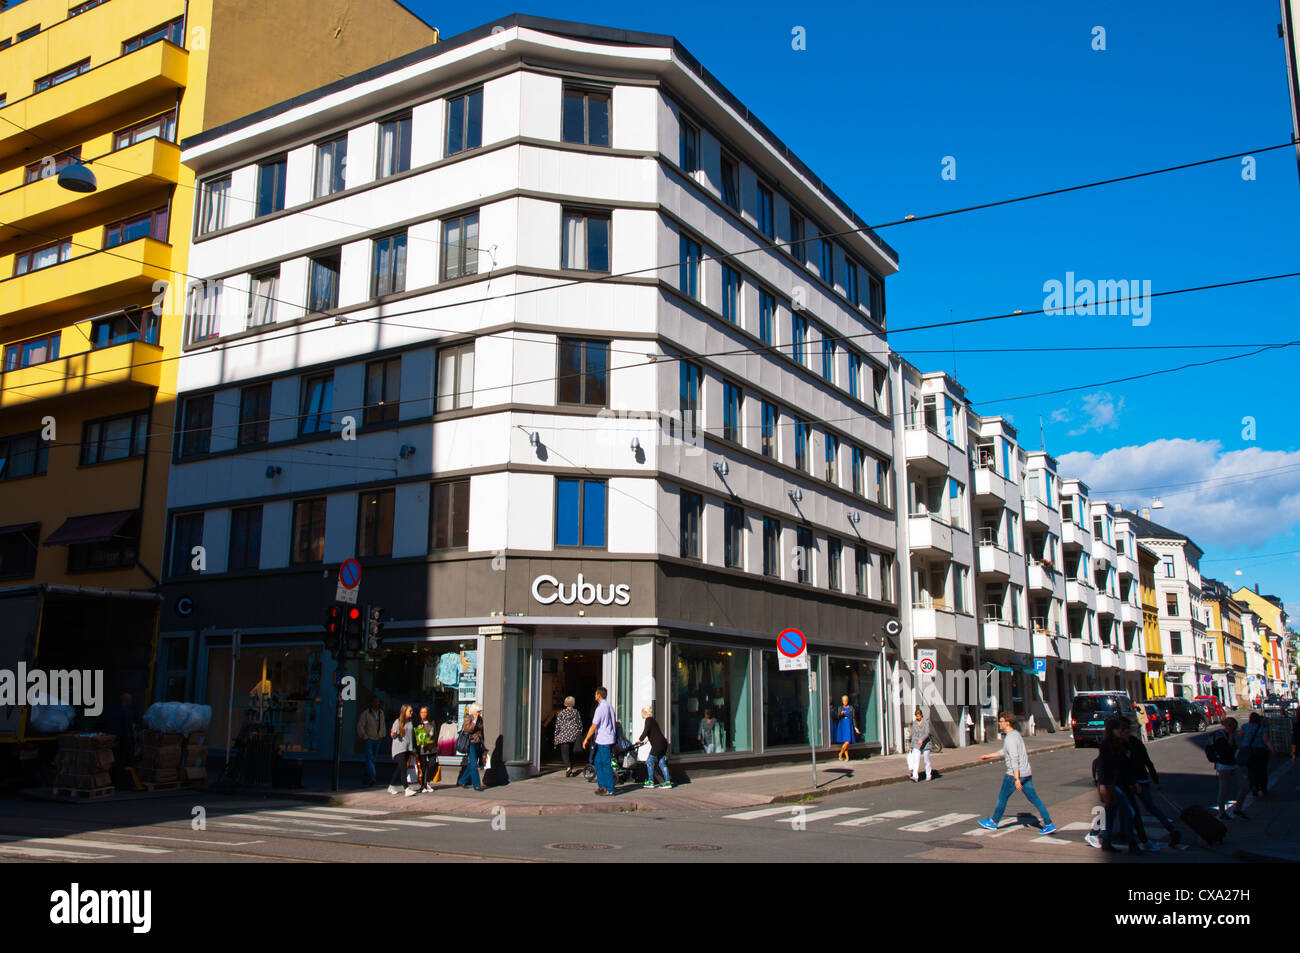 Shopping Oslo High Resolution Stock Photography and Images - Alamy